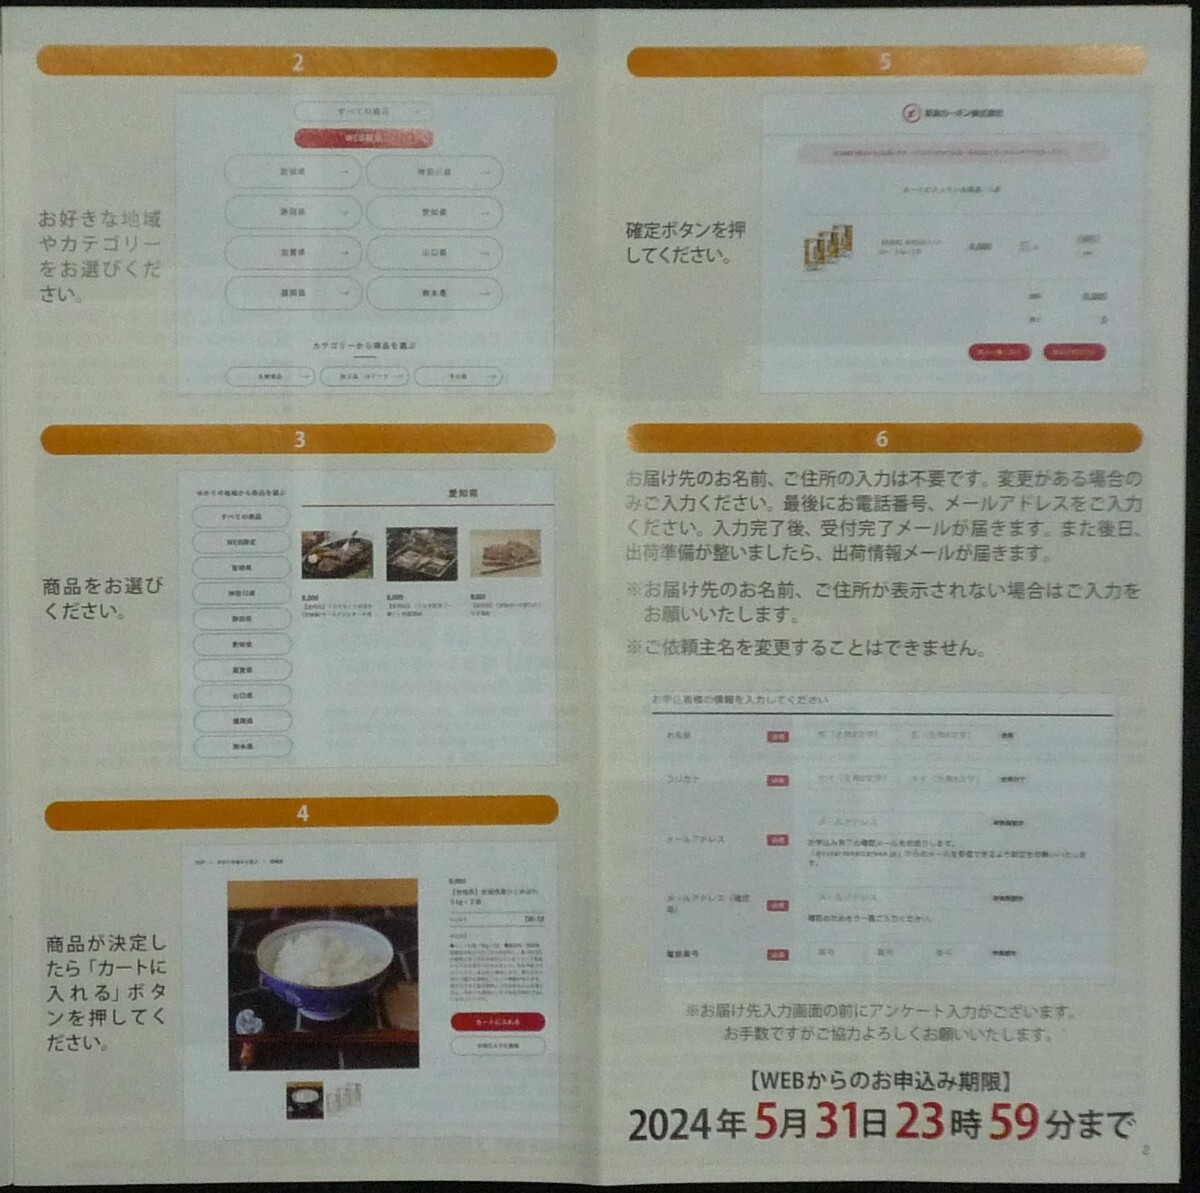  free shipping equipped * catalog gift 3000 jpy corresponding Tokai carbon stockholder hospitality . included postcard stock 4 piece have gift catalog rice meat food Point .. newest prompt decision 